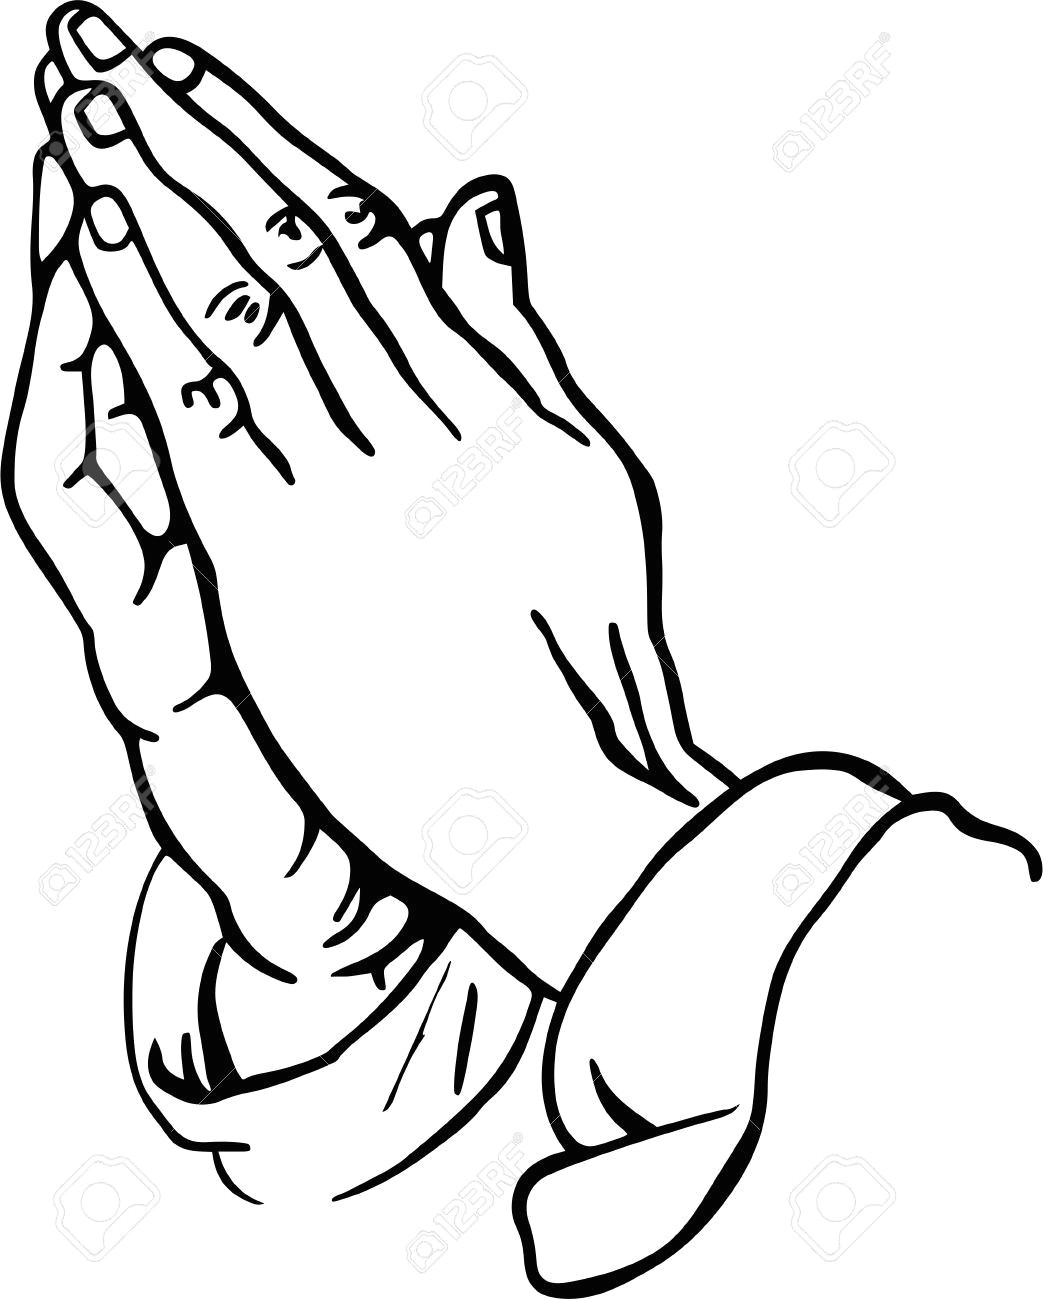 Drawing Hands Interpretation Praying Hands Clipart Stock Photo Picture and Royalty Free Image